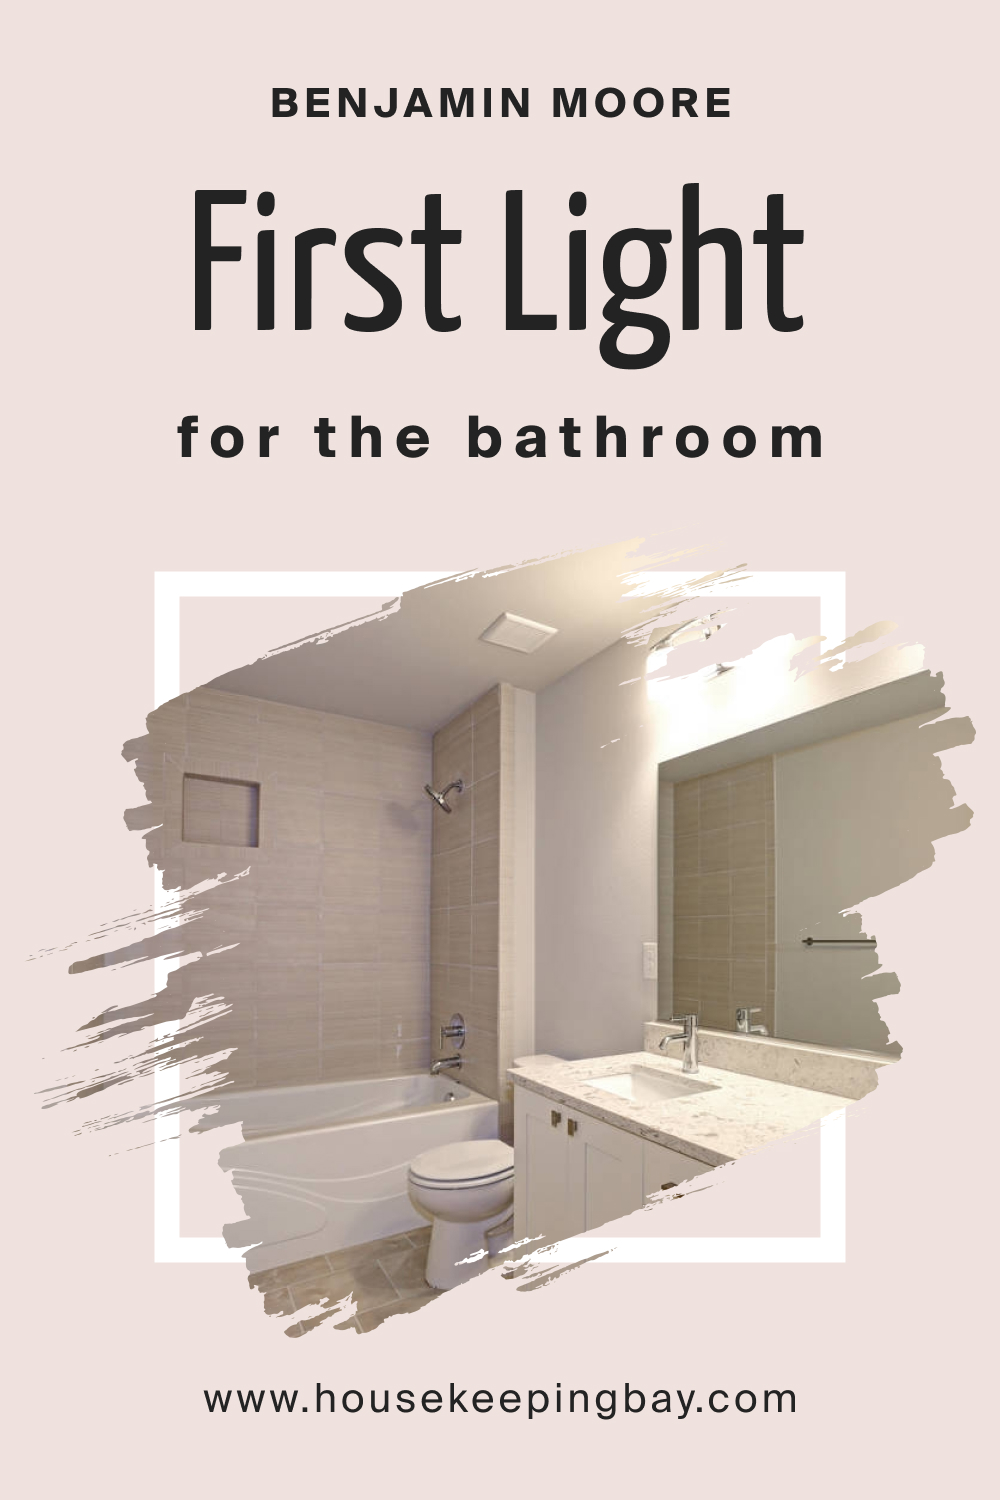 Benjamin Moore. First Light 2102 70 for the Bathroom